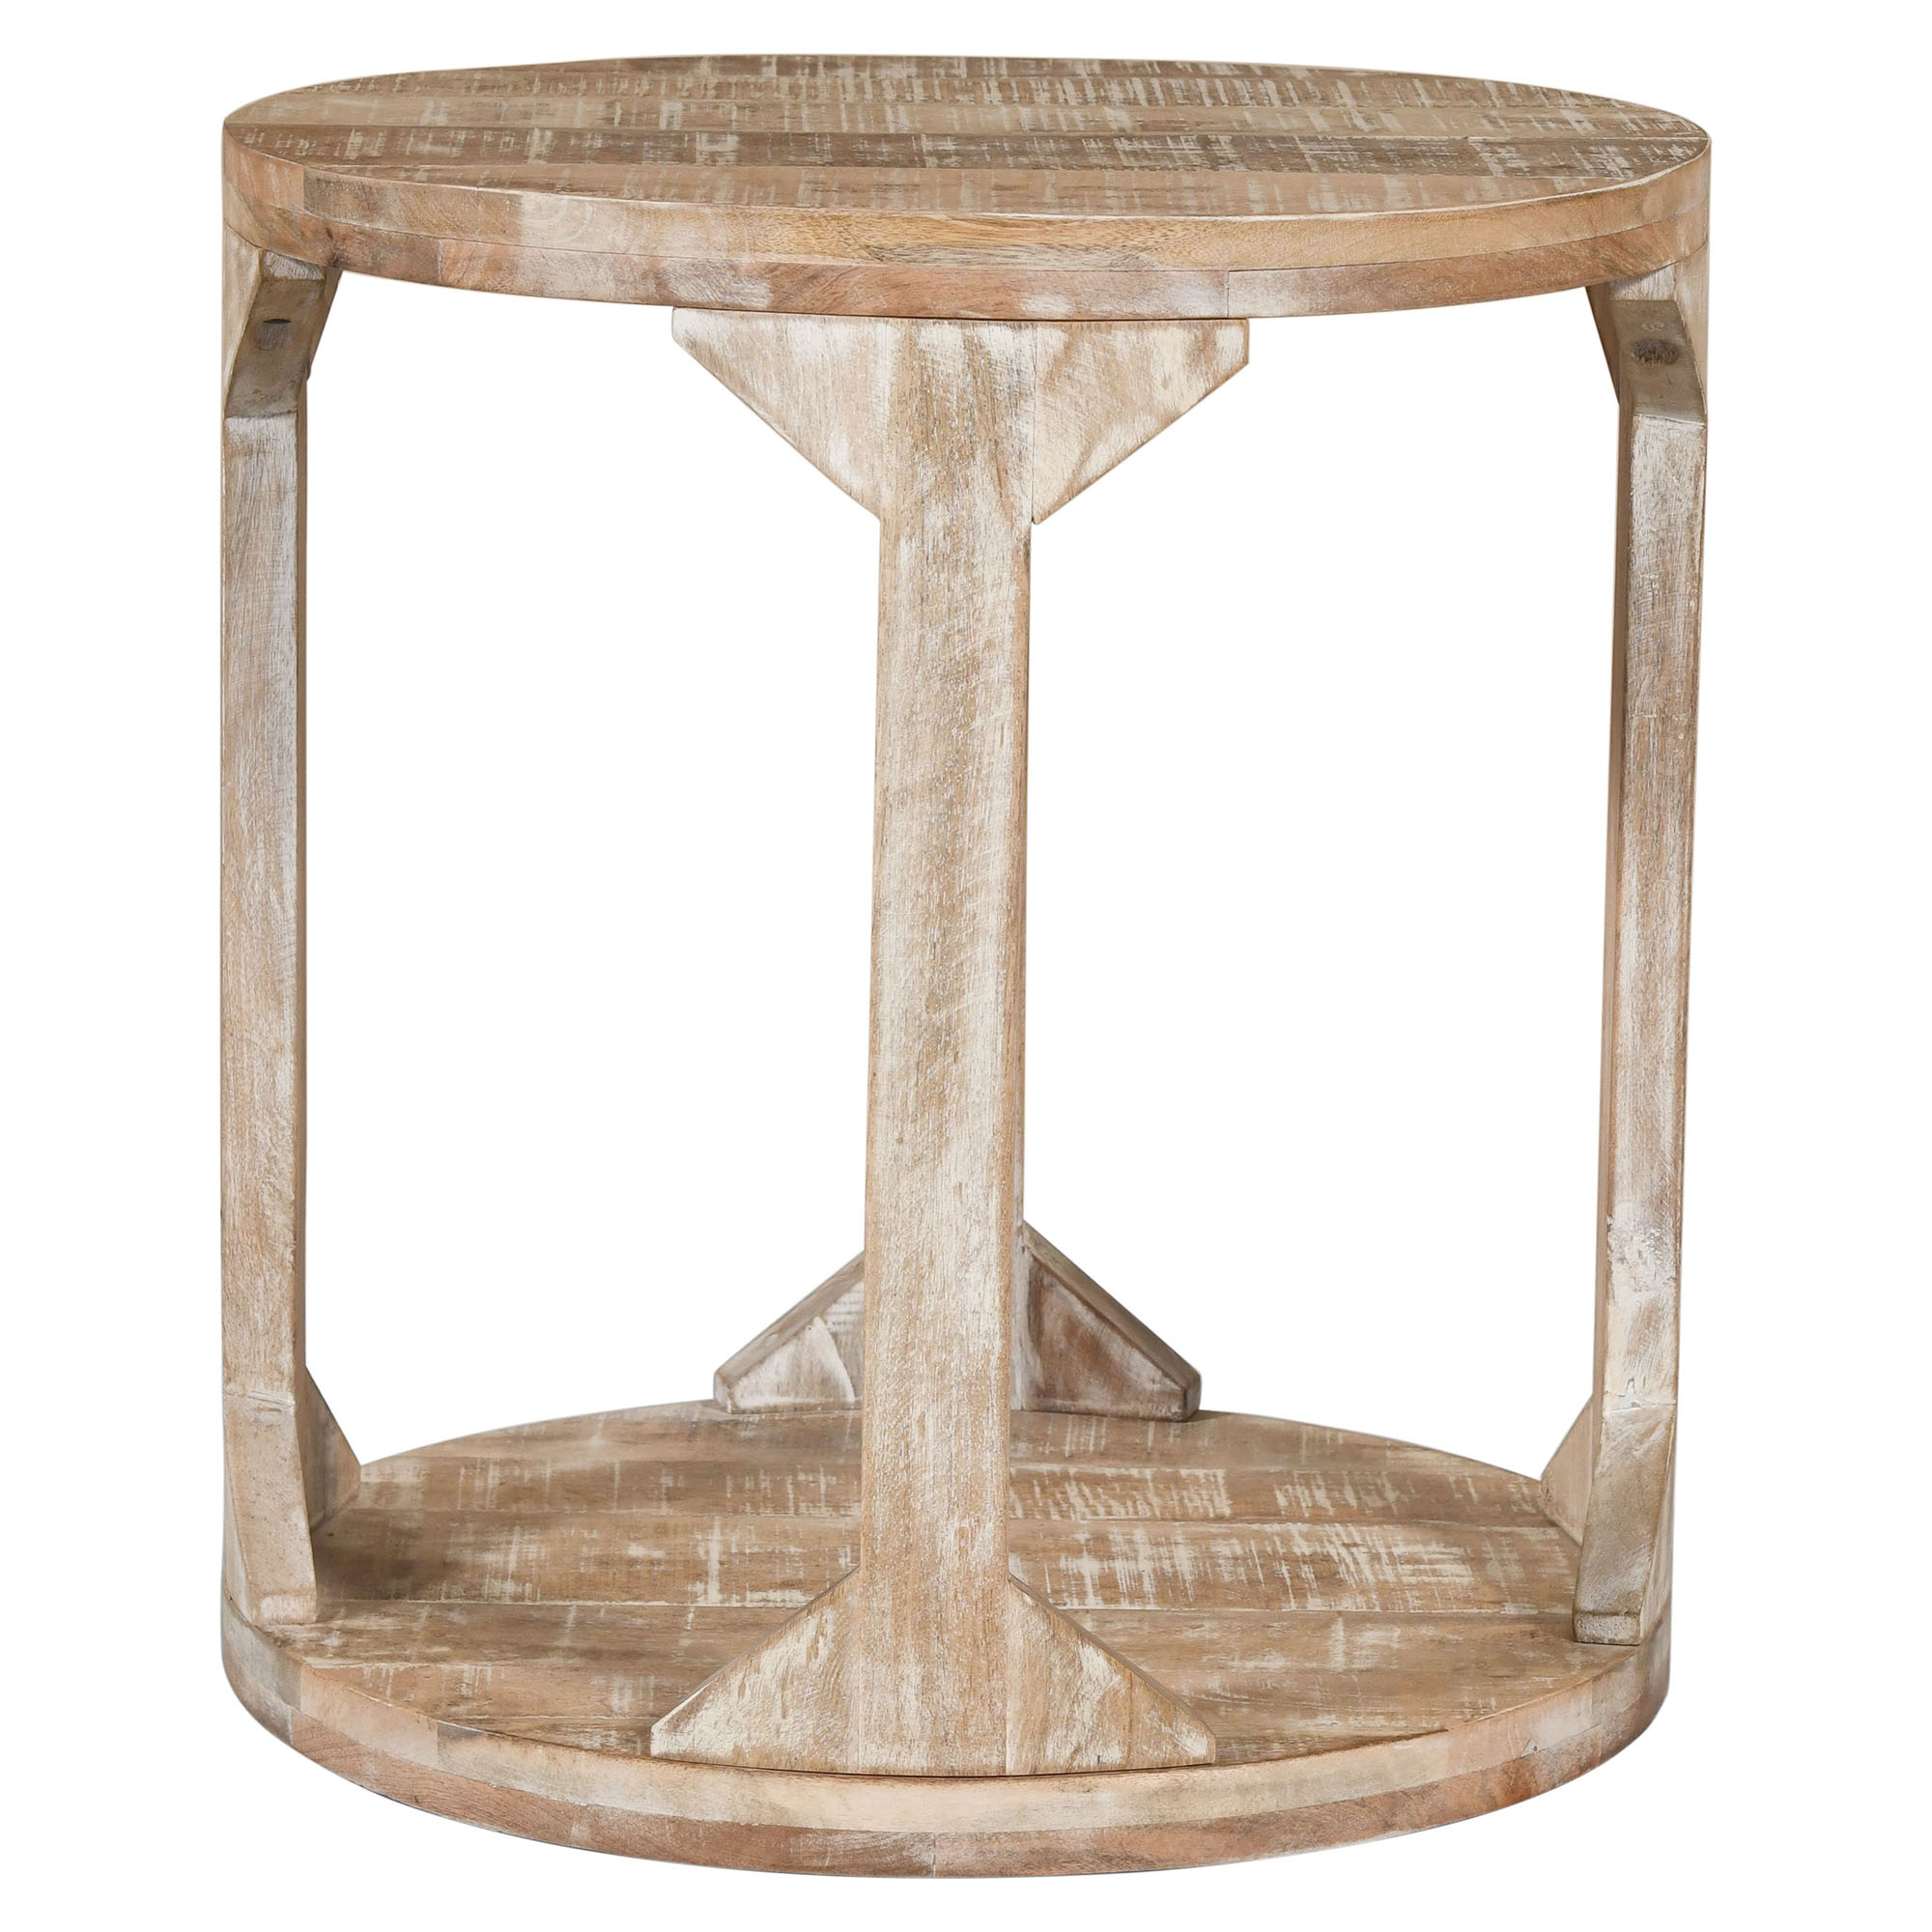 Avni Accent Table Distressed Natural